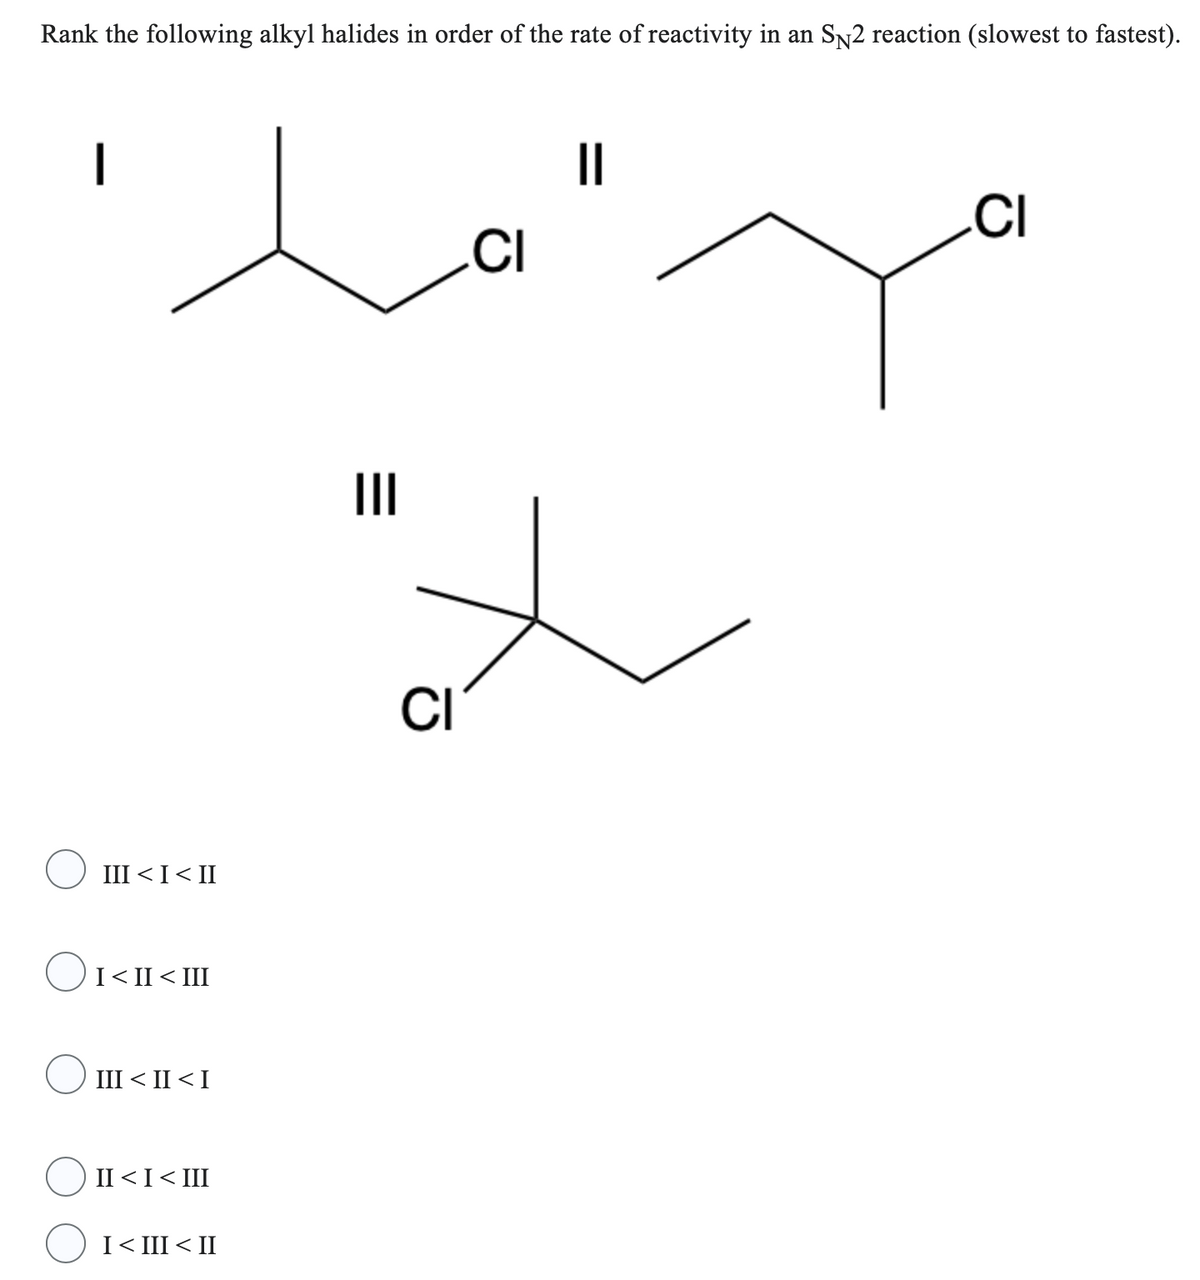 Rank the following alkyl halides in order of the rate of reactivity in an SÃ2 reaction (slowest to fastest).
1
III < I< II
OI<II<III
III < II < I
II < I< III
I < III < II
=
|||
CI
CI
||
CI